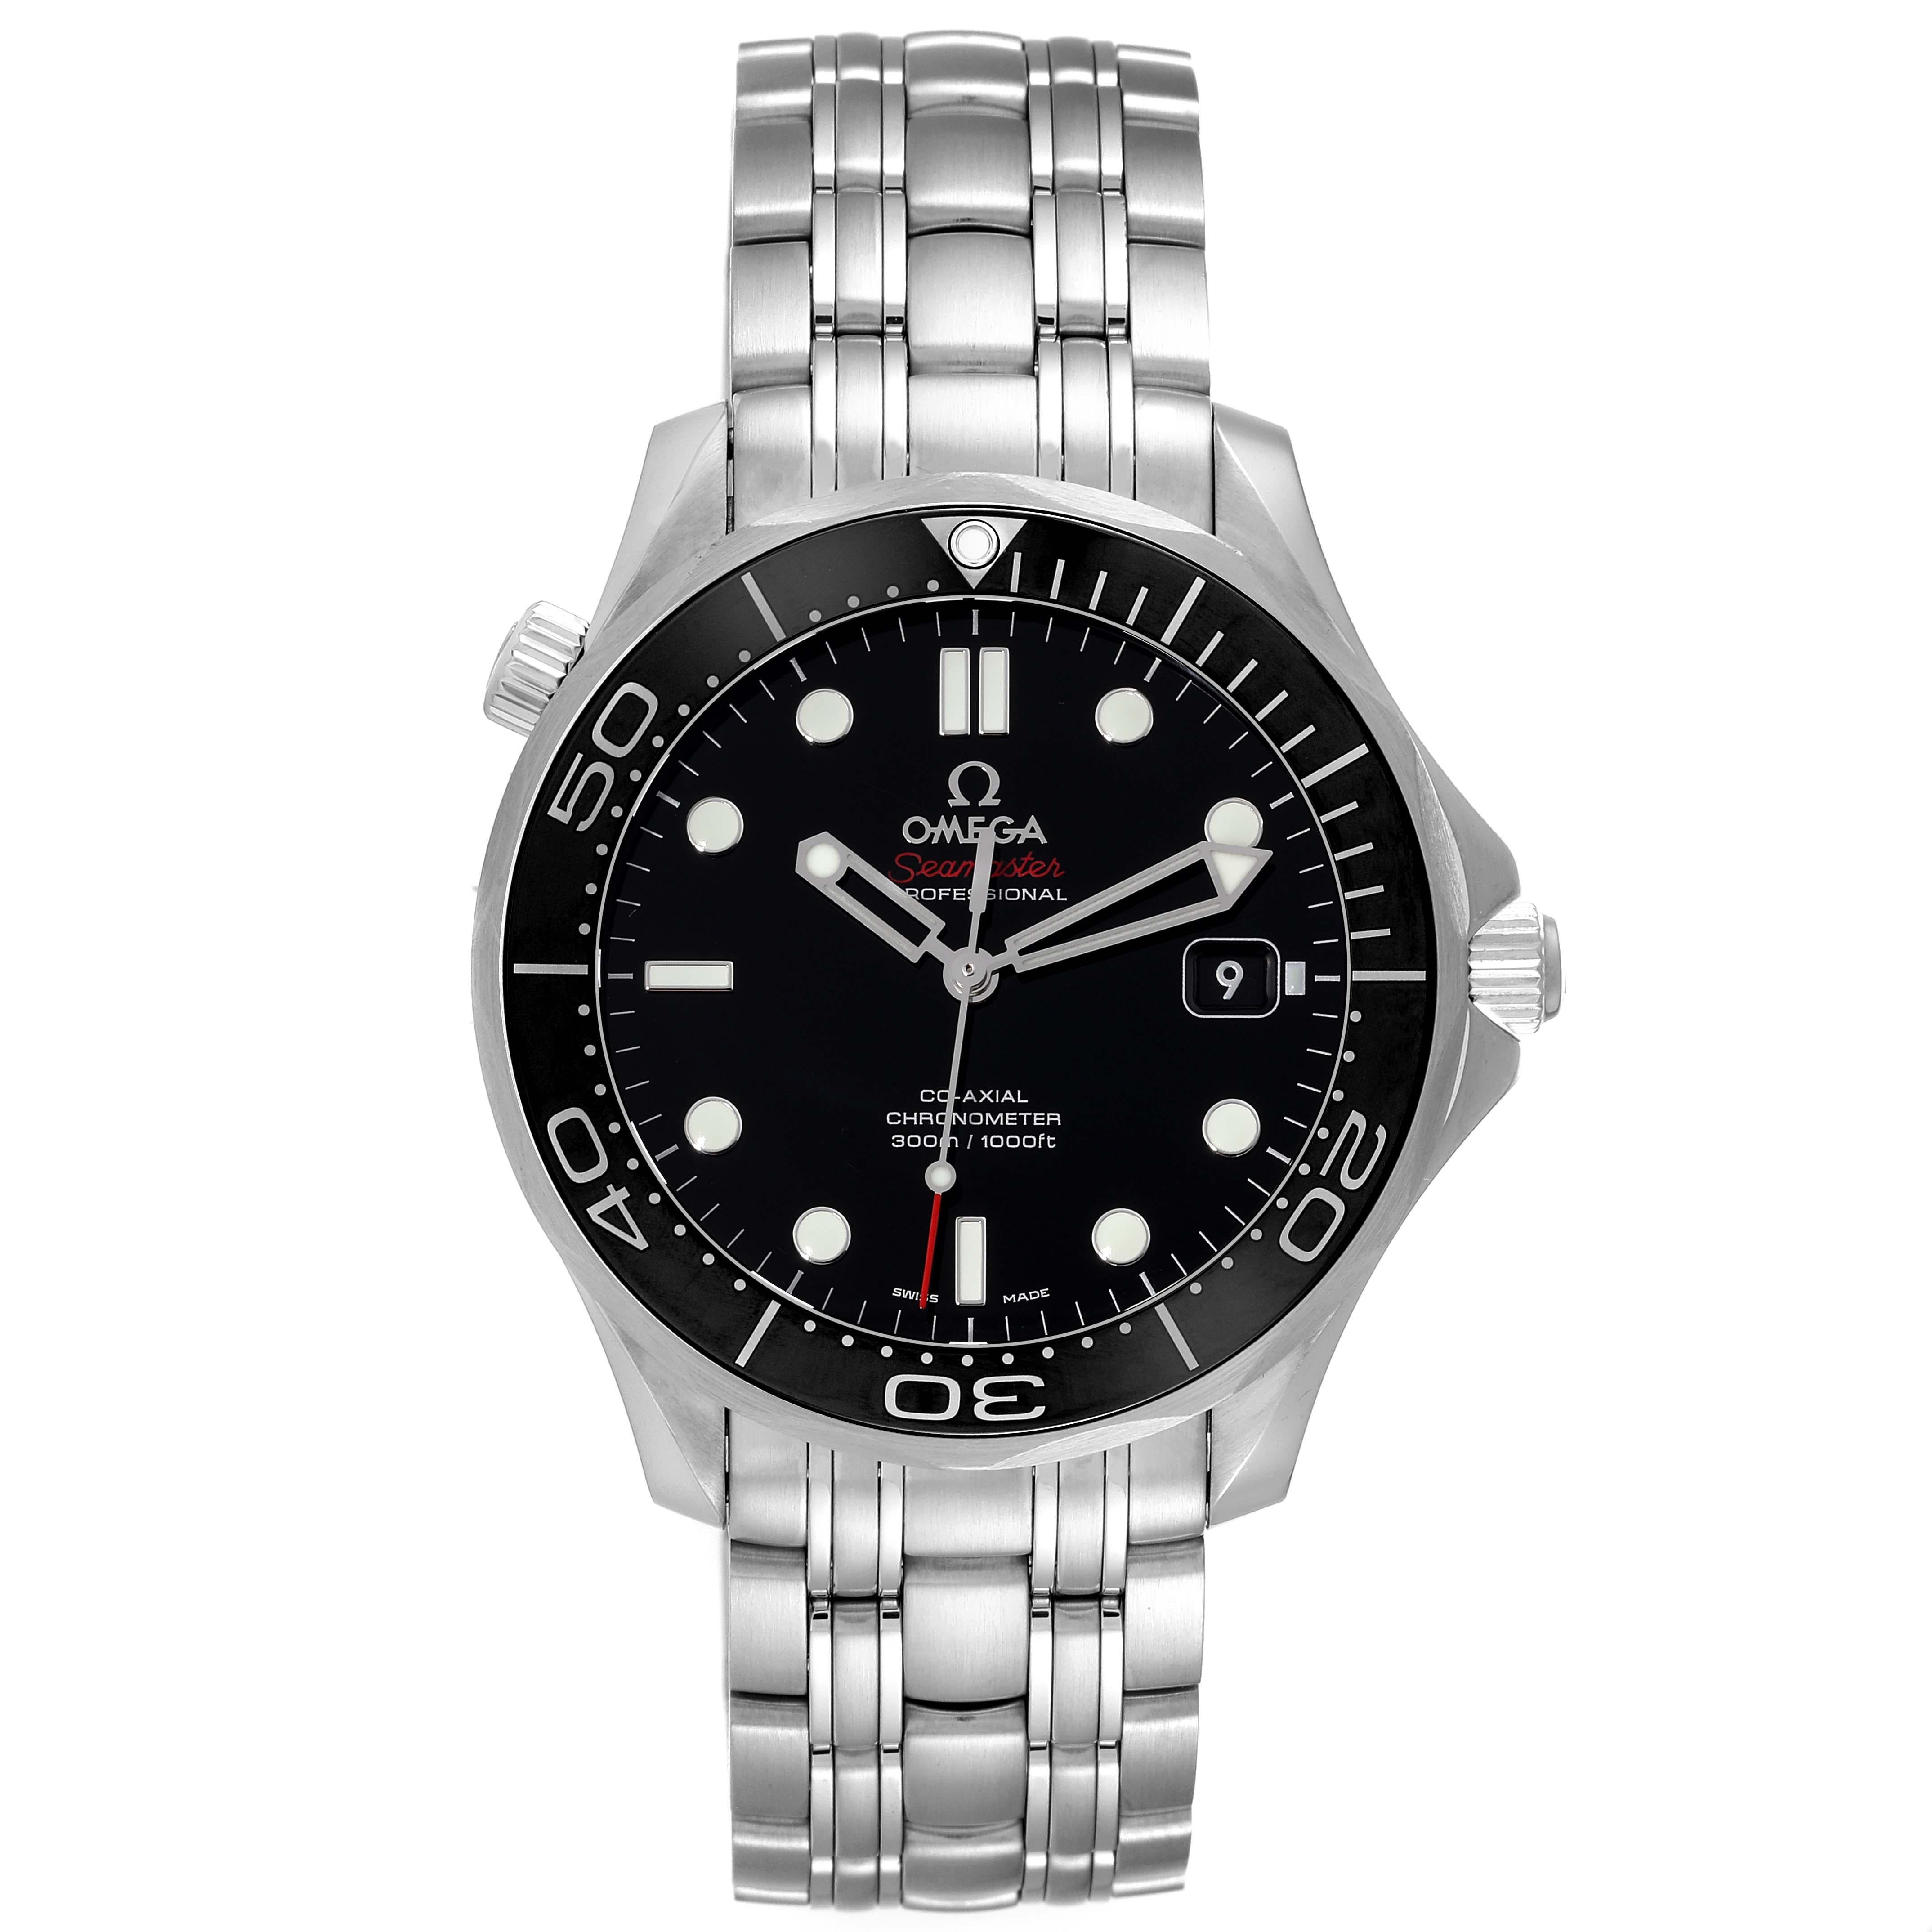 Omega Seamaster Diver 300M Steel Mens Watch 212.30.41.20.01.003. Automatic self-winding chronometer, Co-Axial Escapement movement. Stainless steel case 41 mm in diameter. Helium escape valve at 10 o'clock. Omega logo on the crown. Black ceramic